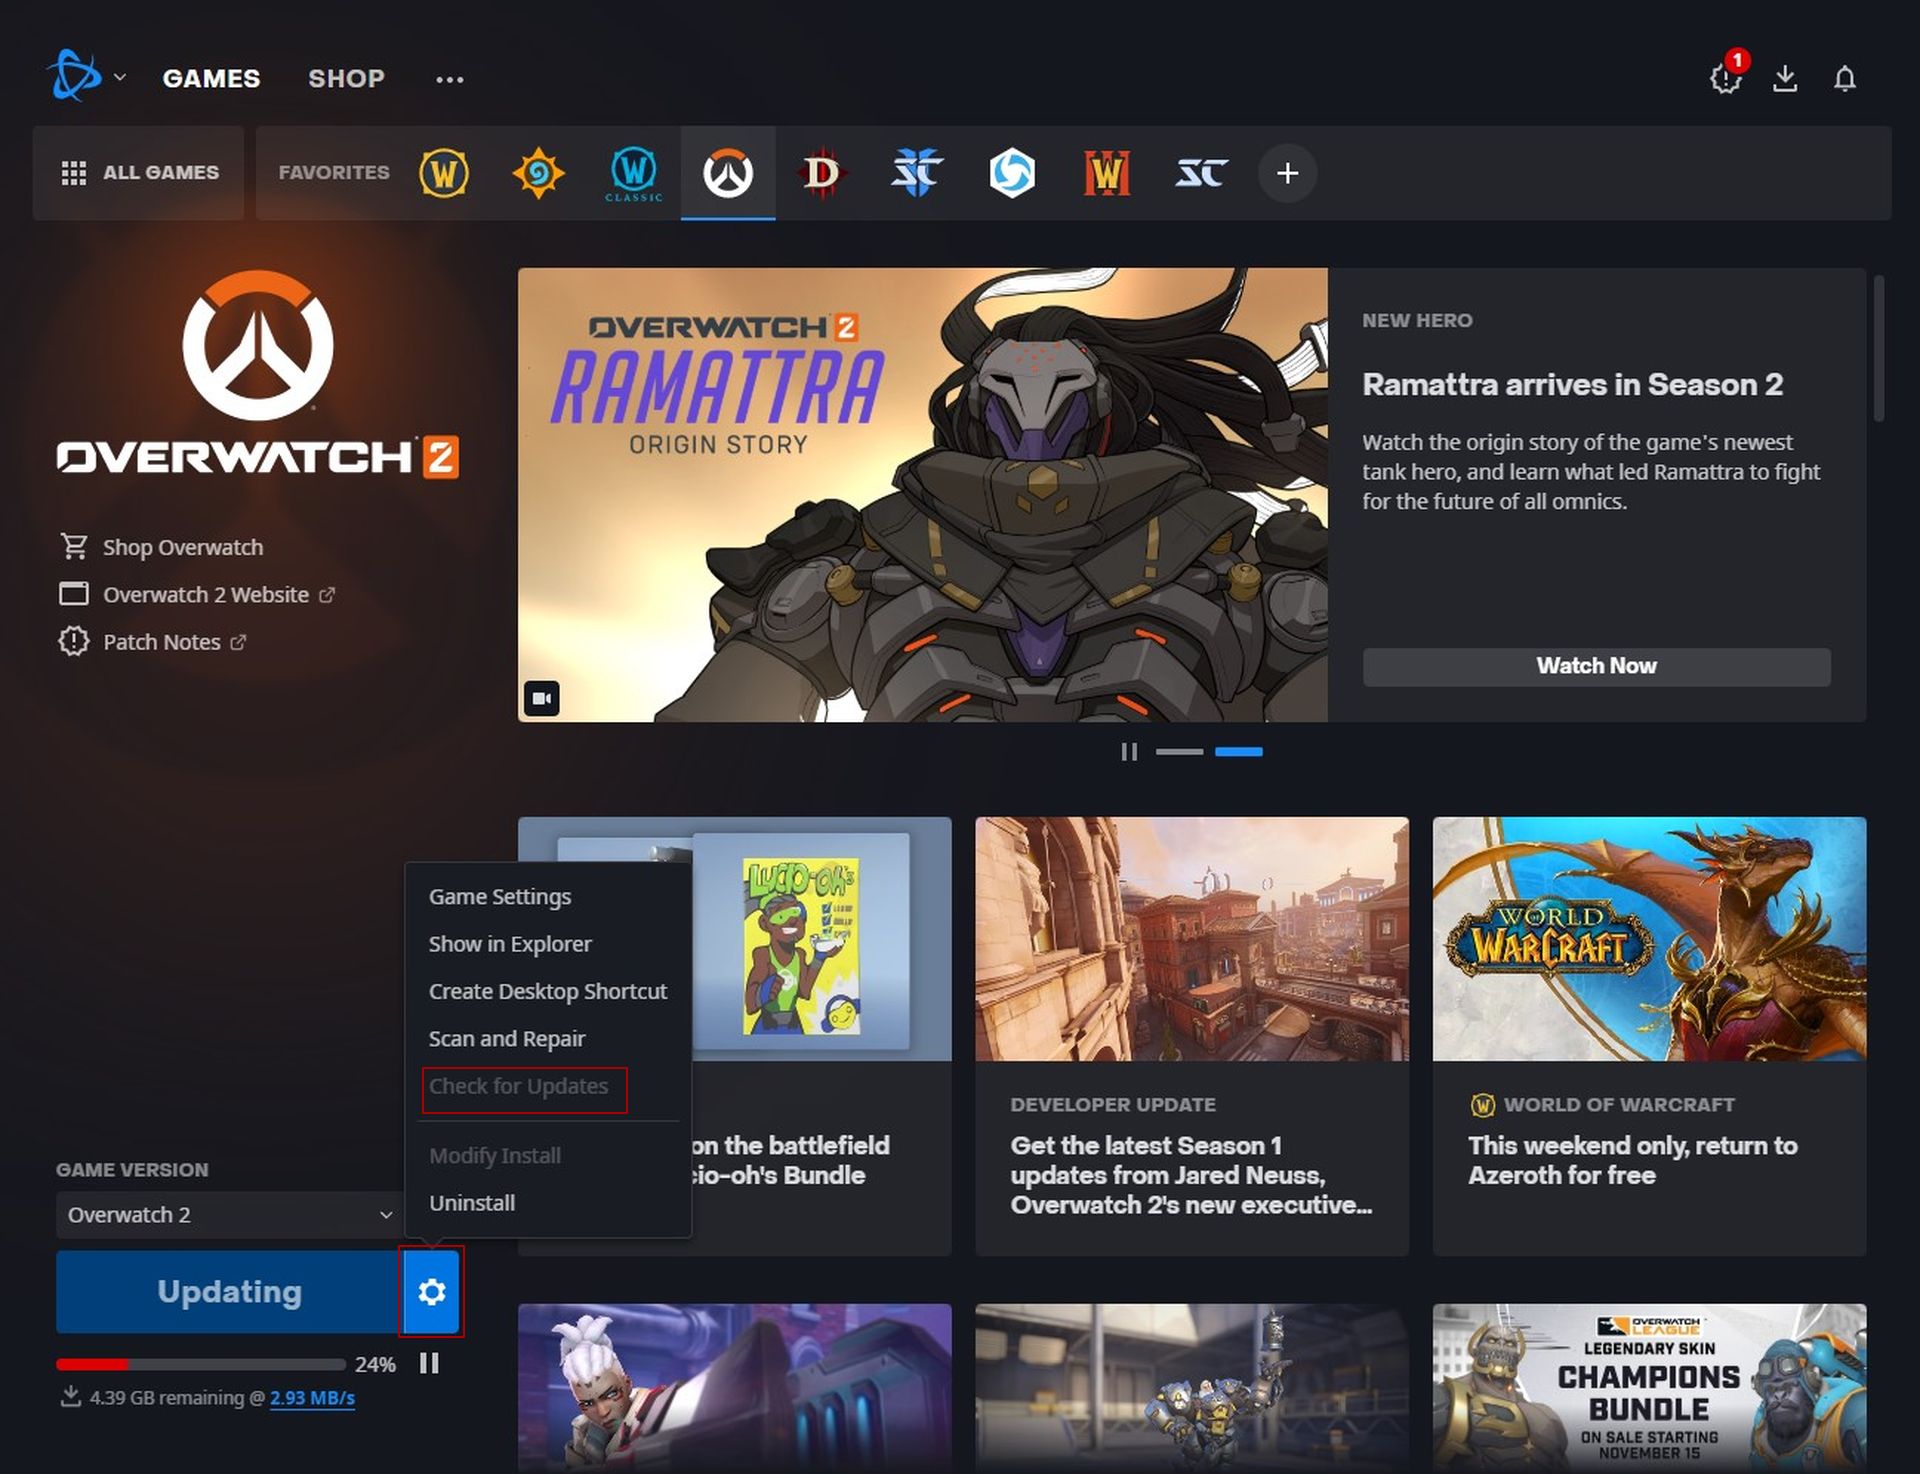 Overwatch 2 invites not working: Check for updates